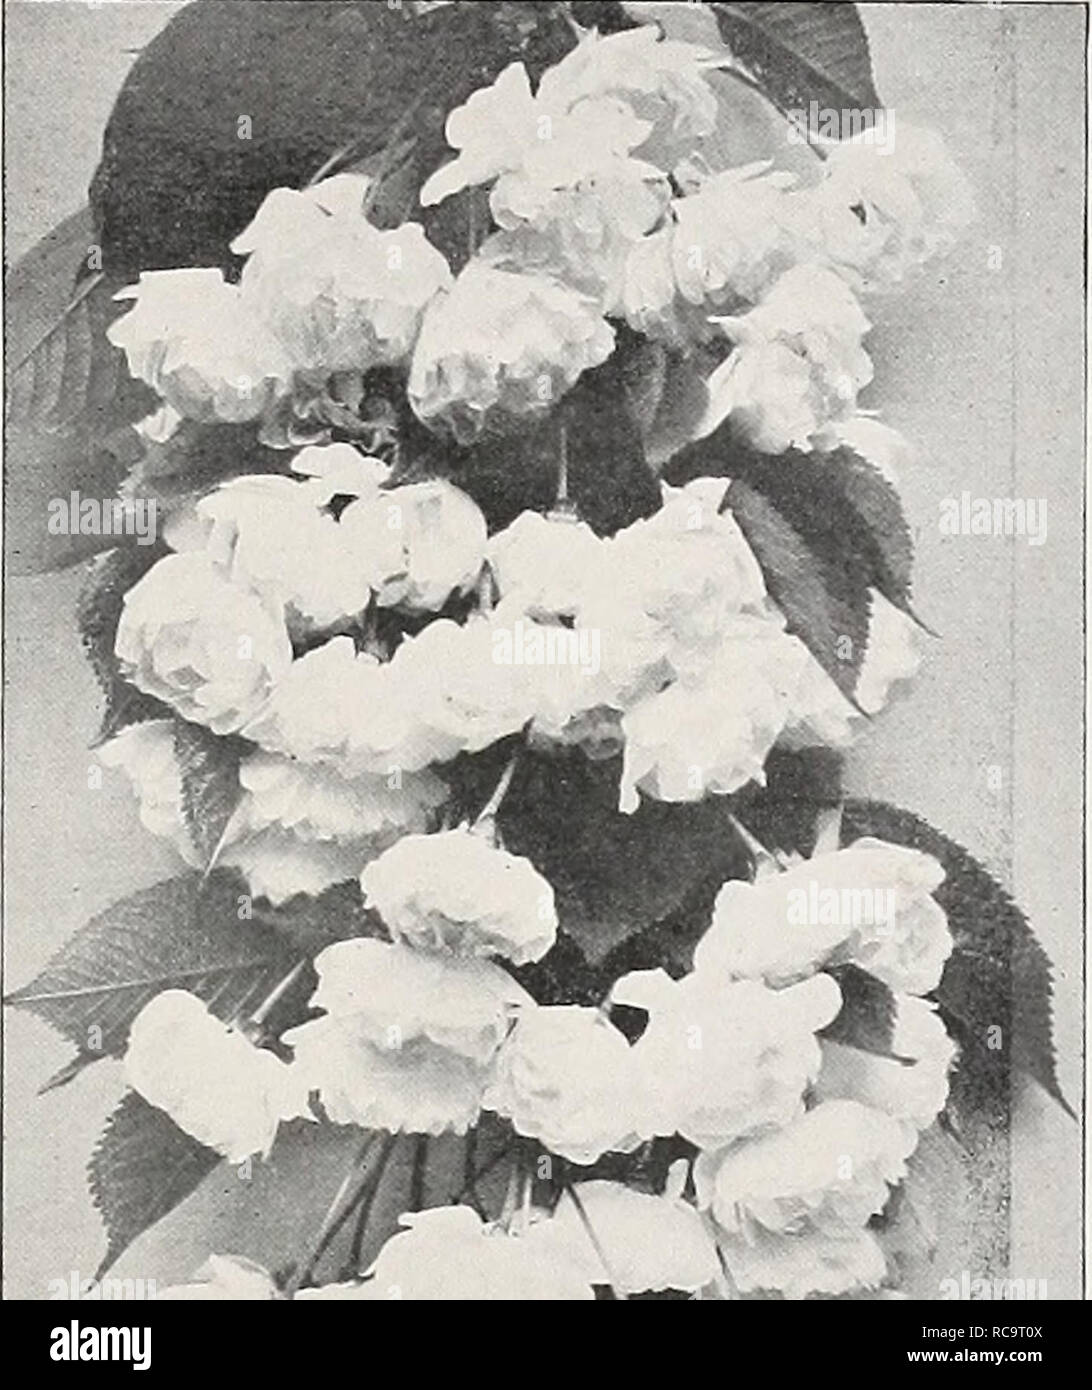 . Ellwanger &amp; Barry : Mount Hope nurseries. GENERAL CATALOGUE. 45 Cerasus Japonica pendula. Japan Weeping Cherry. C. Resembles pumila pendula somewhat, but is much more feathery and graceful; flowers single white, fruit red. One of the finest of the small-headed pendent cherries. $1.50. C. Japonica. var. rosea pendula. Japan Weeping Rose-flowered Chrery. C. Brought from Japan by Von Siebold, and is certainly one of the finest pendulous trees for lawns or small grounds. The branches are slender, and fall gracefully to the ground, and the flowers are rose- colored, appearing before the leave Stock Photo